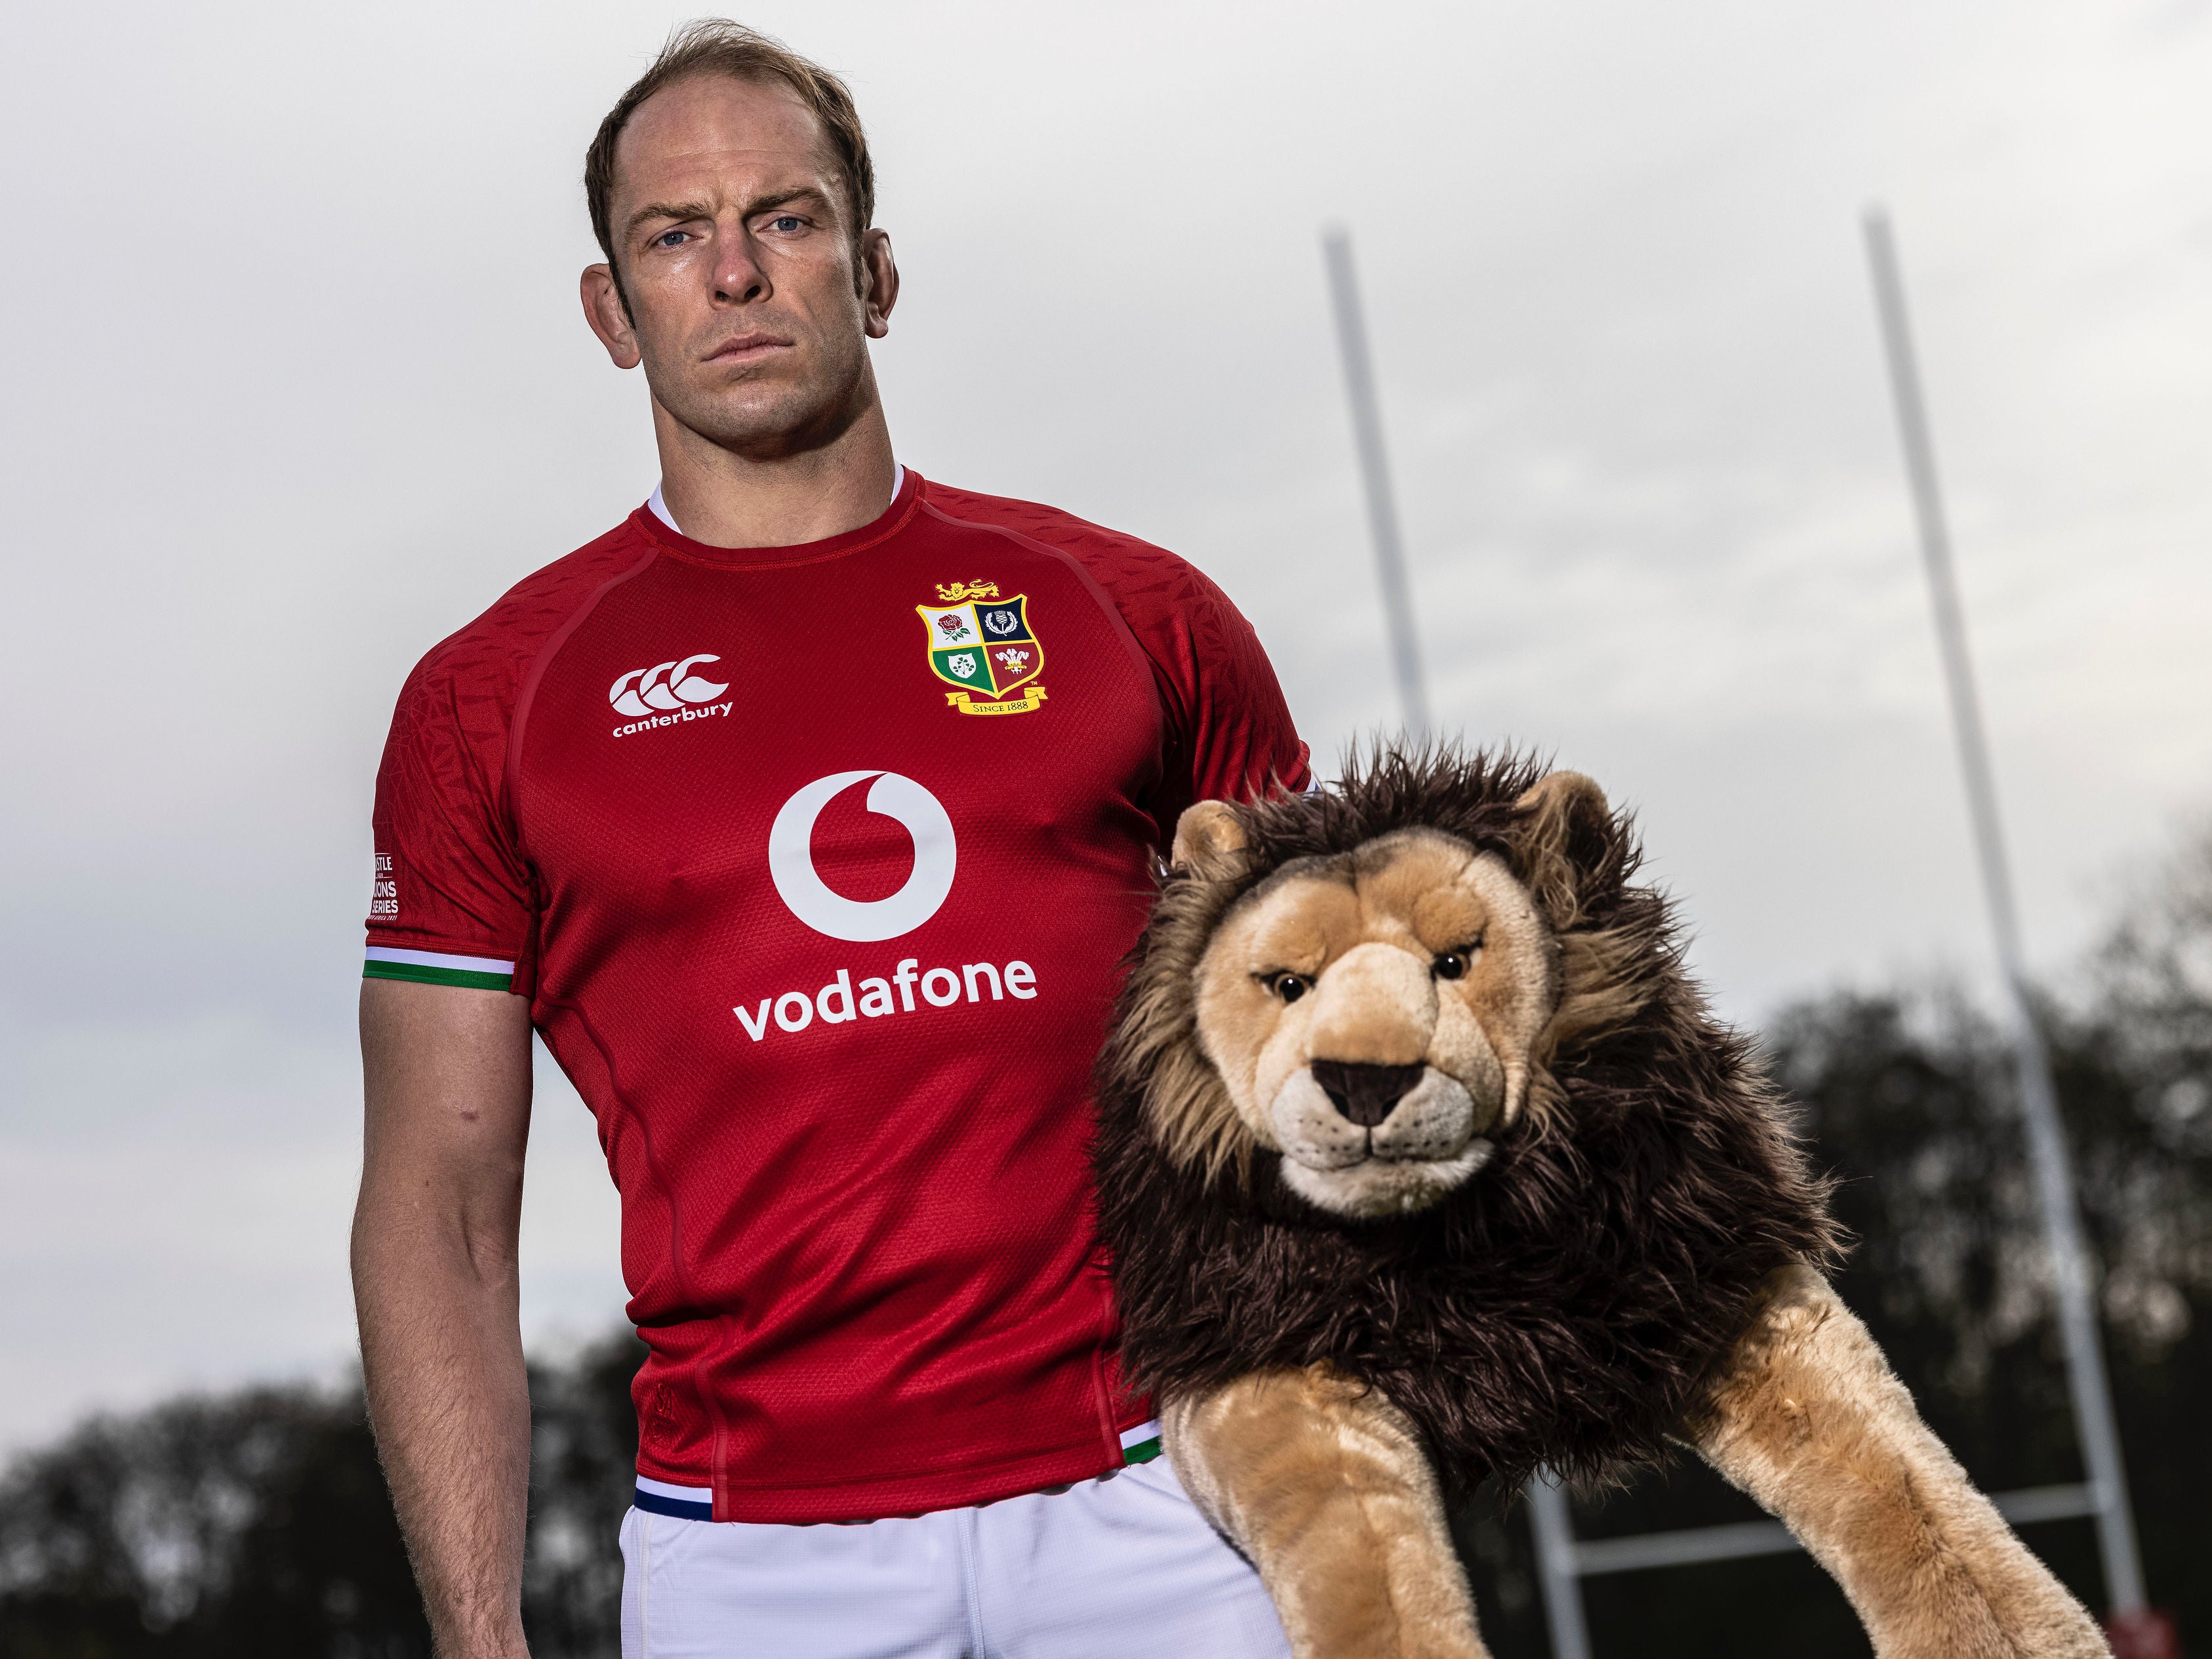 Alun Wyn Jones was the standout candidate for captaincy